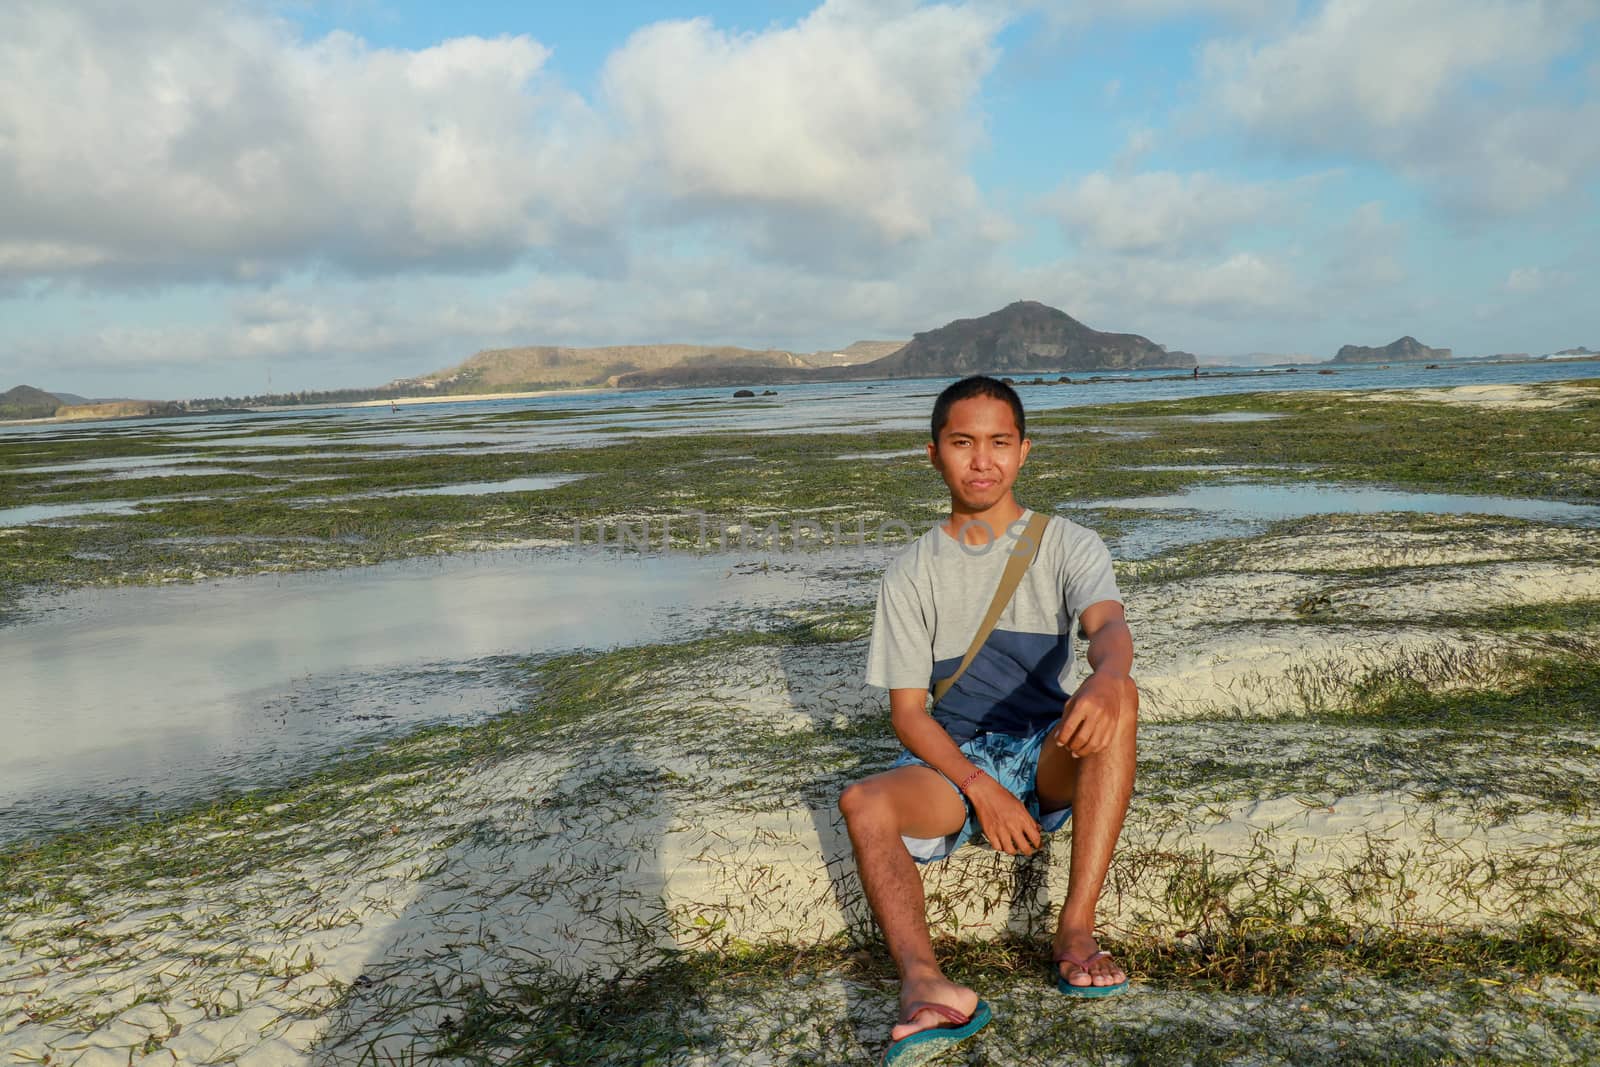 Relaxed young man meditating while sitting on the beach. Portrait of an attractive young man on a tropical beach. Teenager in a blue-gray T-shirt sitting on the beach.